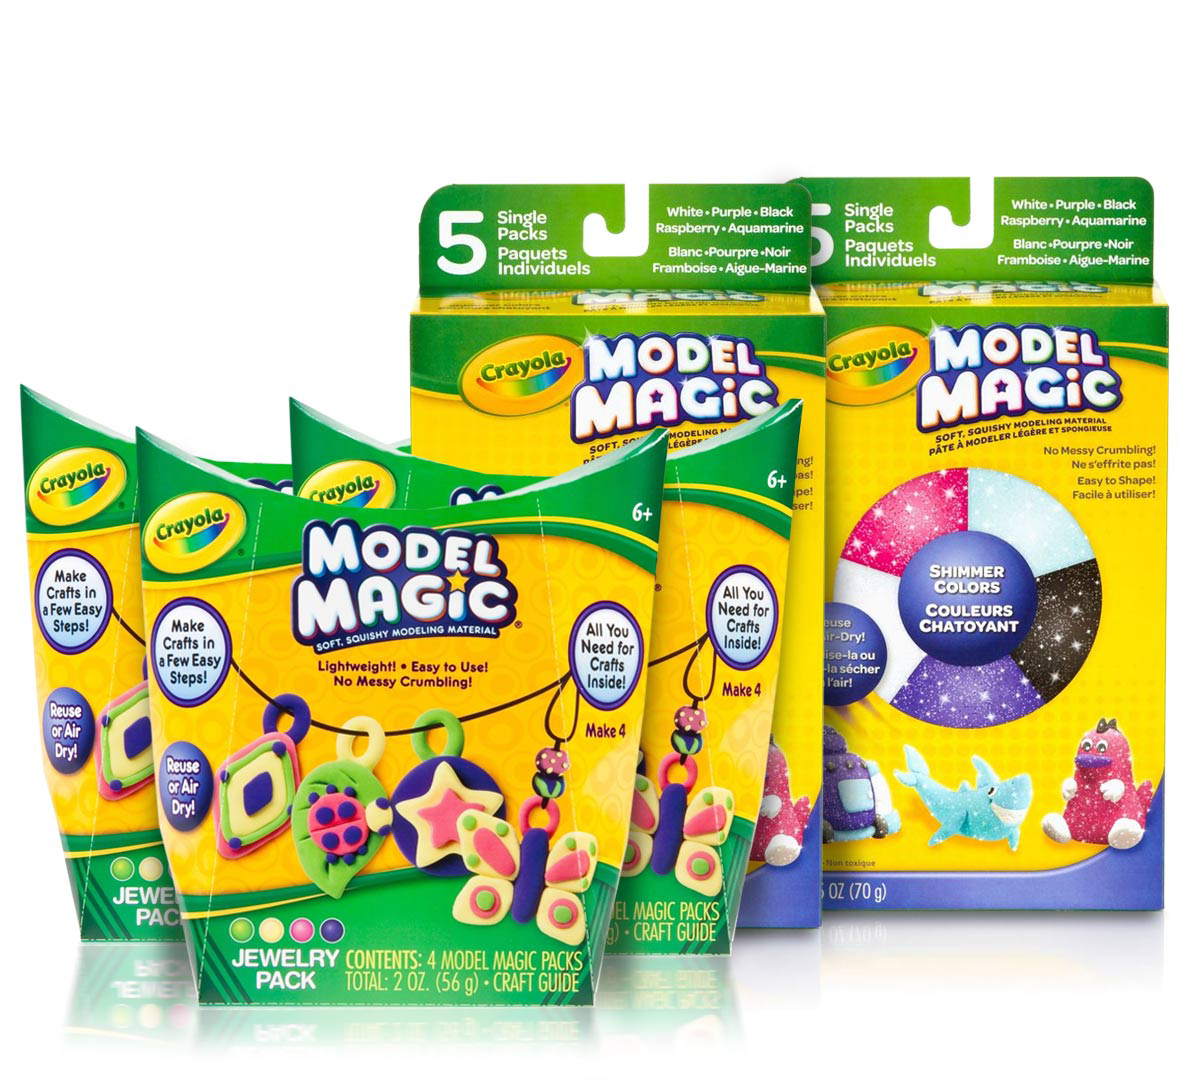 Download Jewelry Making Kit for Kids Party Craft | Crayola.com | Crayola